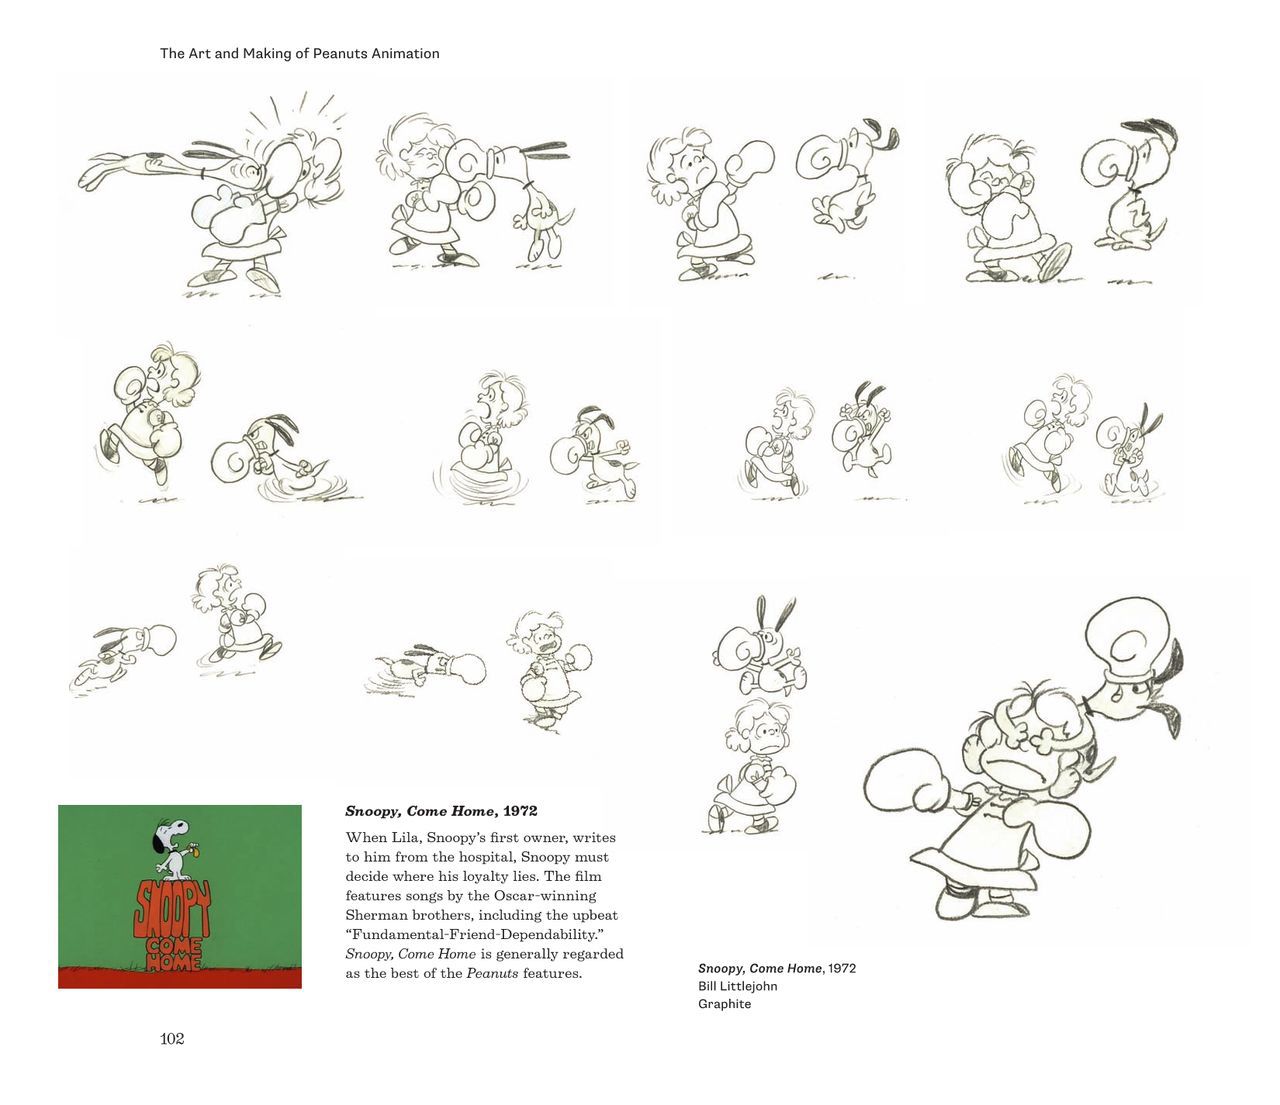 The Art and Making of Peanuts Animation 106